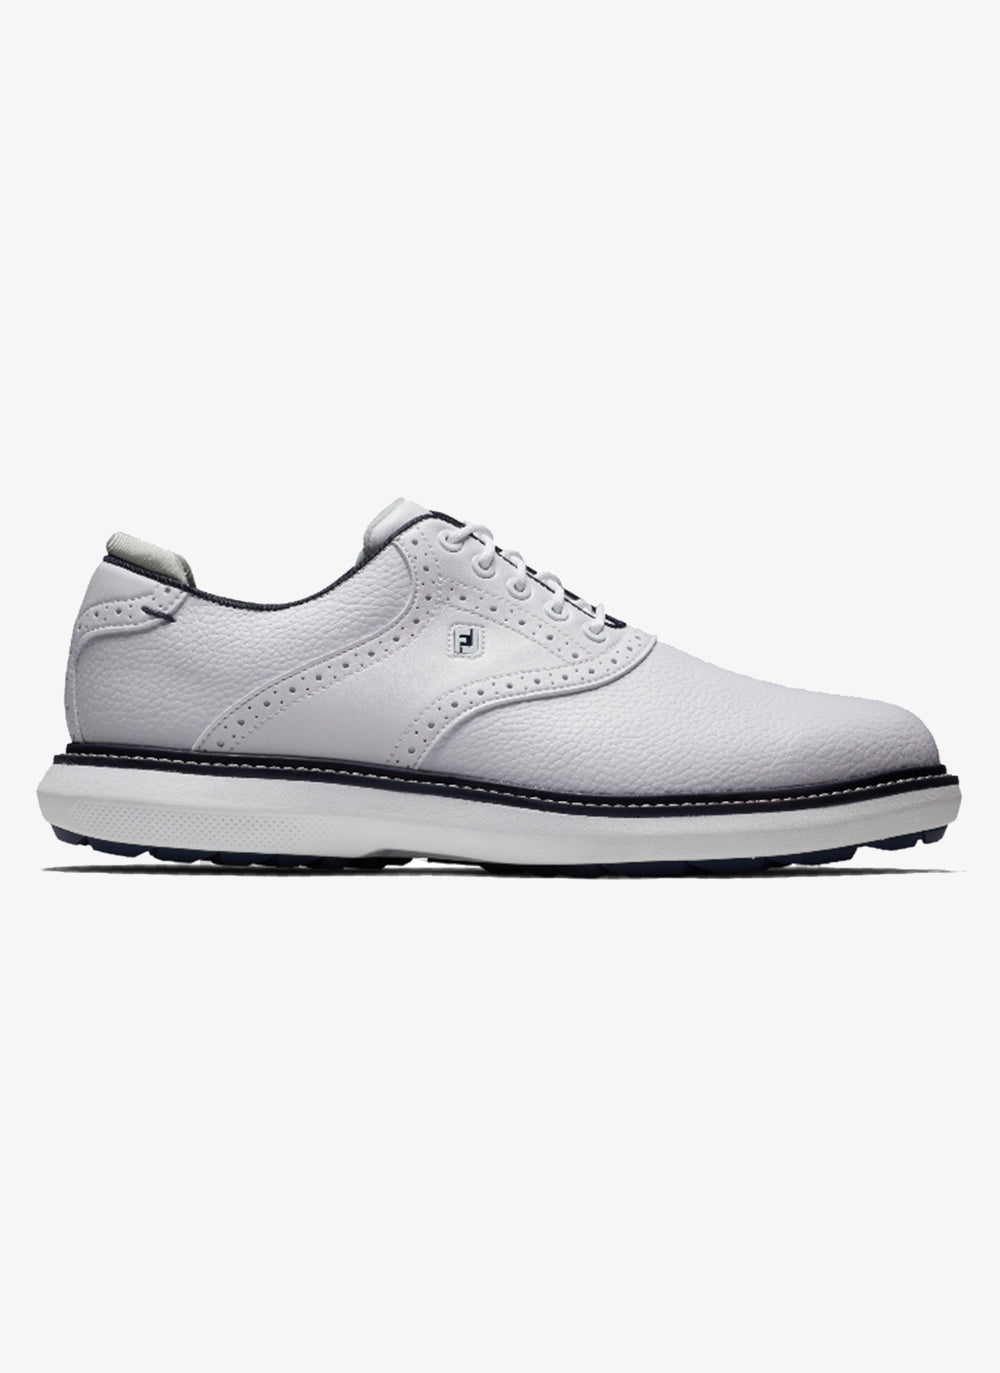 FootJoy Traditions Golf Shoes 57927